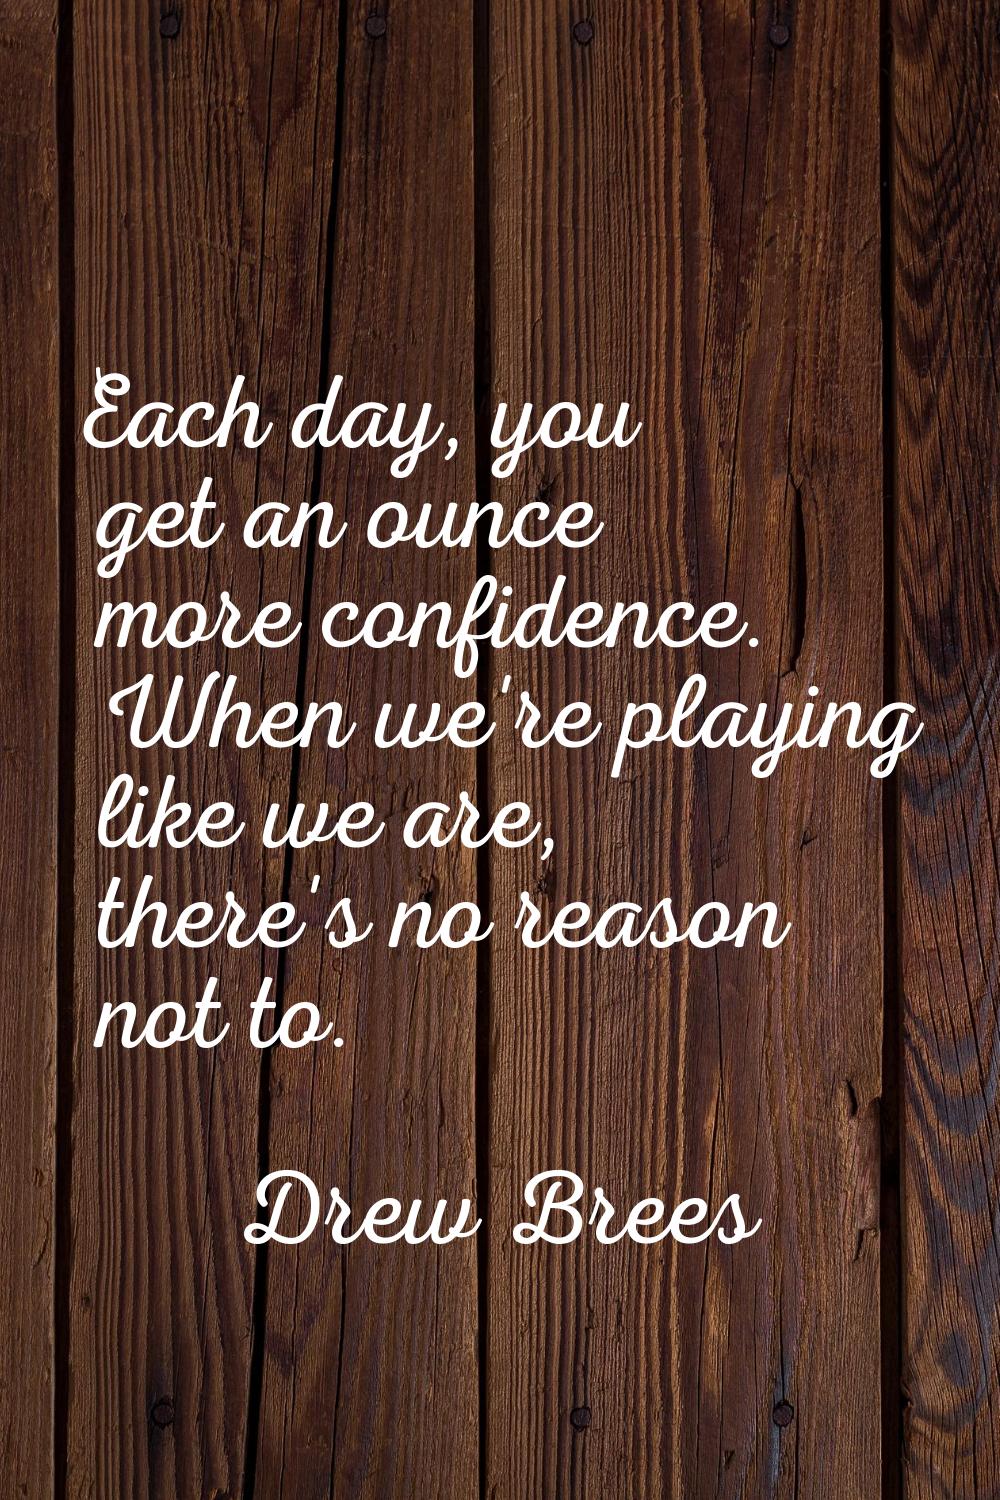 Each day, you get an ounce more confidence. When we're playing like we are, there's no reason not t